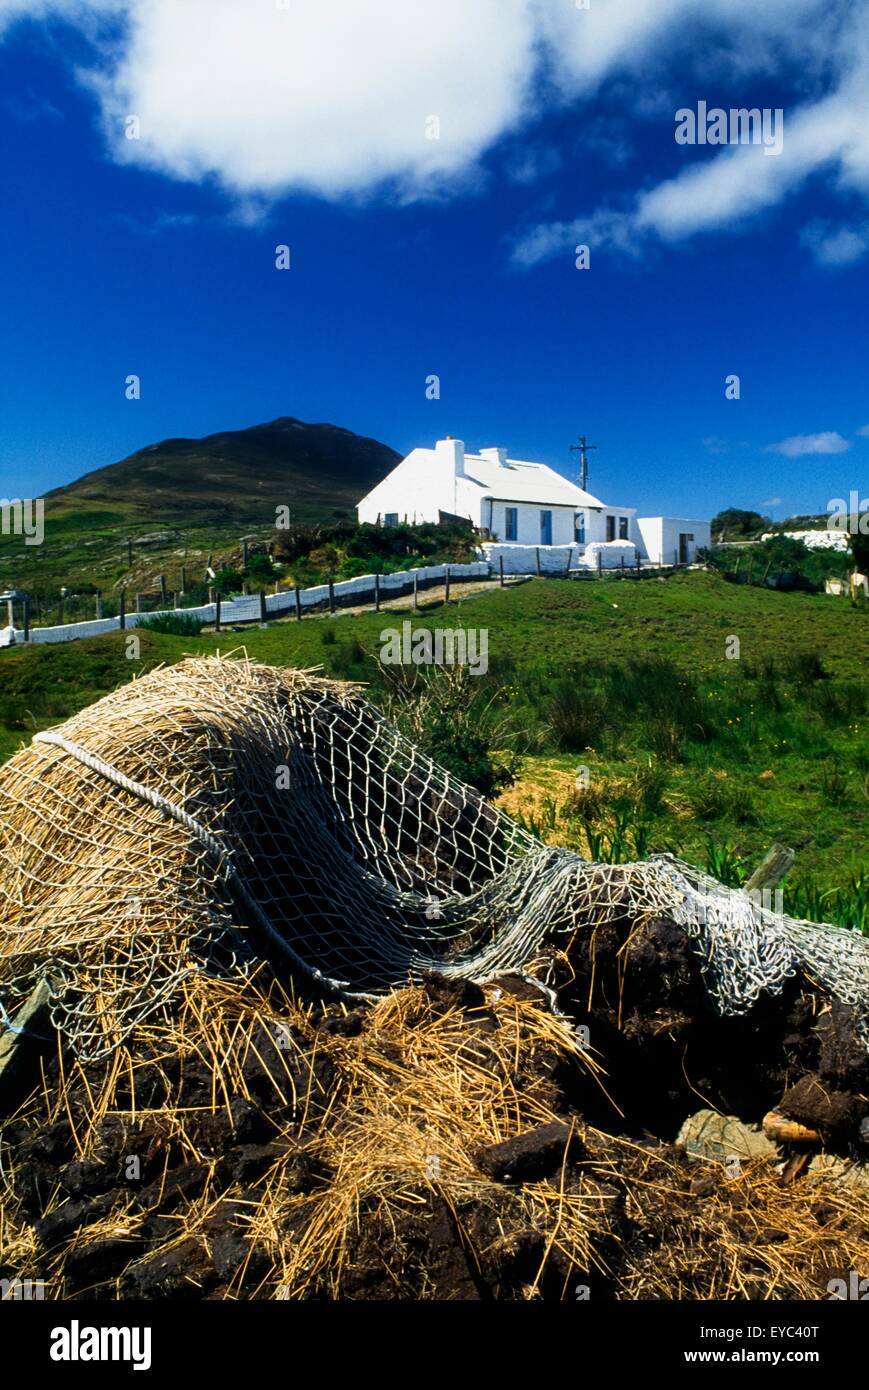 Vicino a Tully Cross, Co Galway, Irlanda; tradizionale cottage in distanza Foto Stock